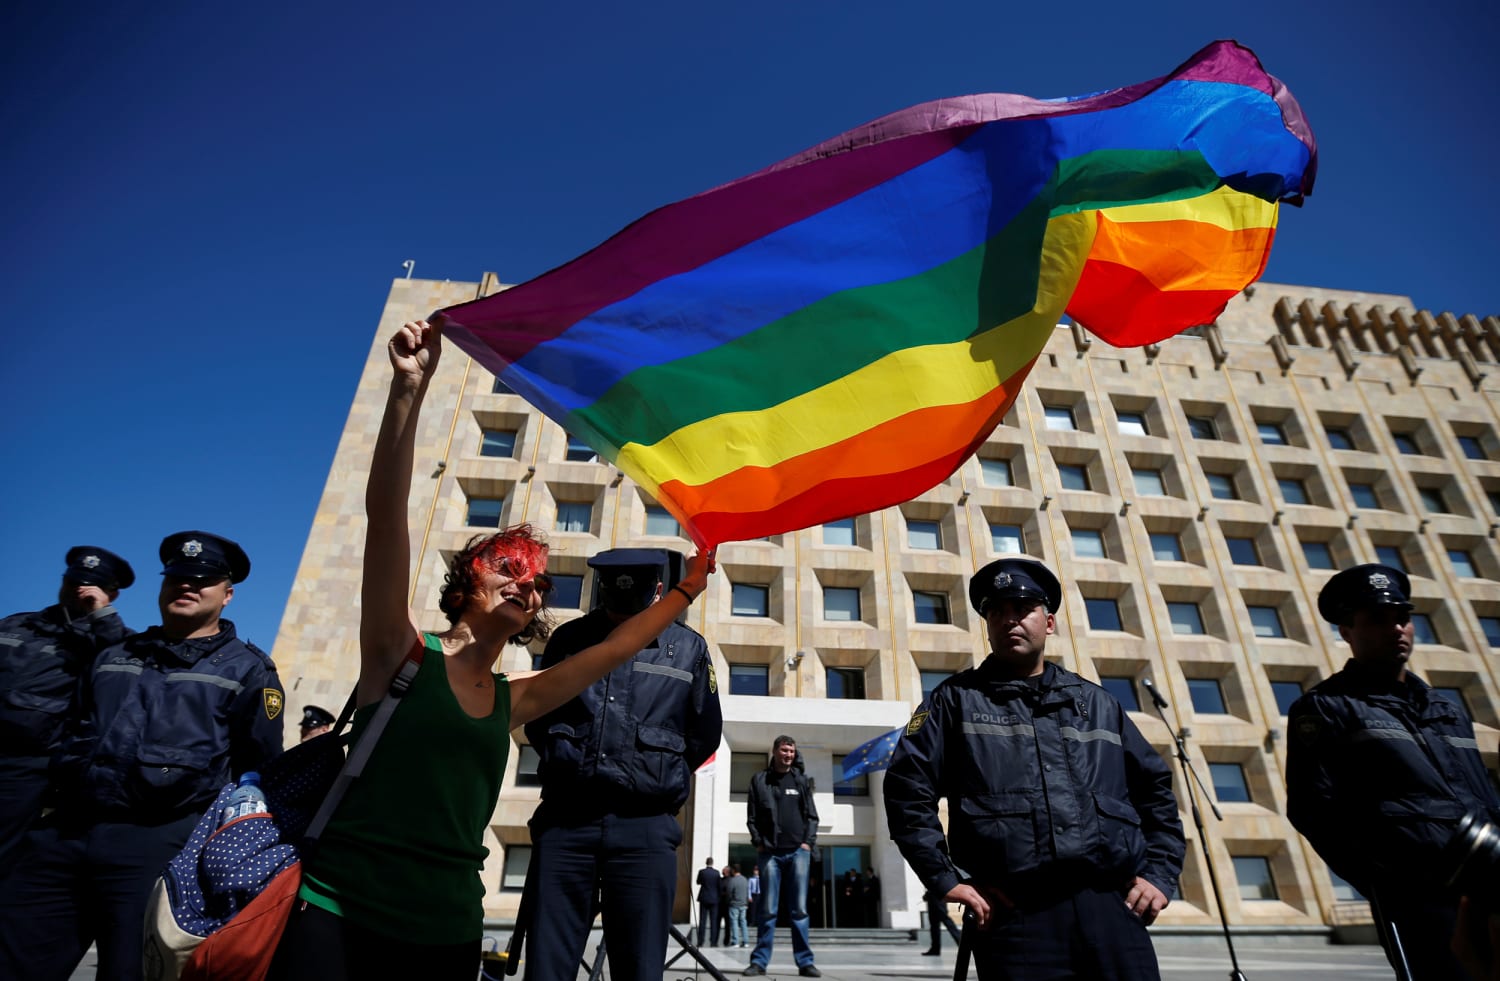 Georgian parliament approves comprehensive restrictions on LGBTQ rights for the time being